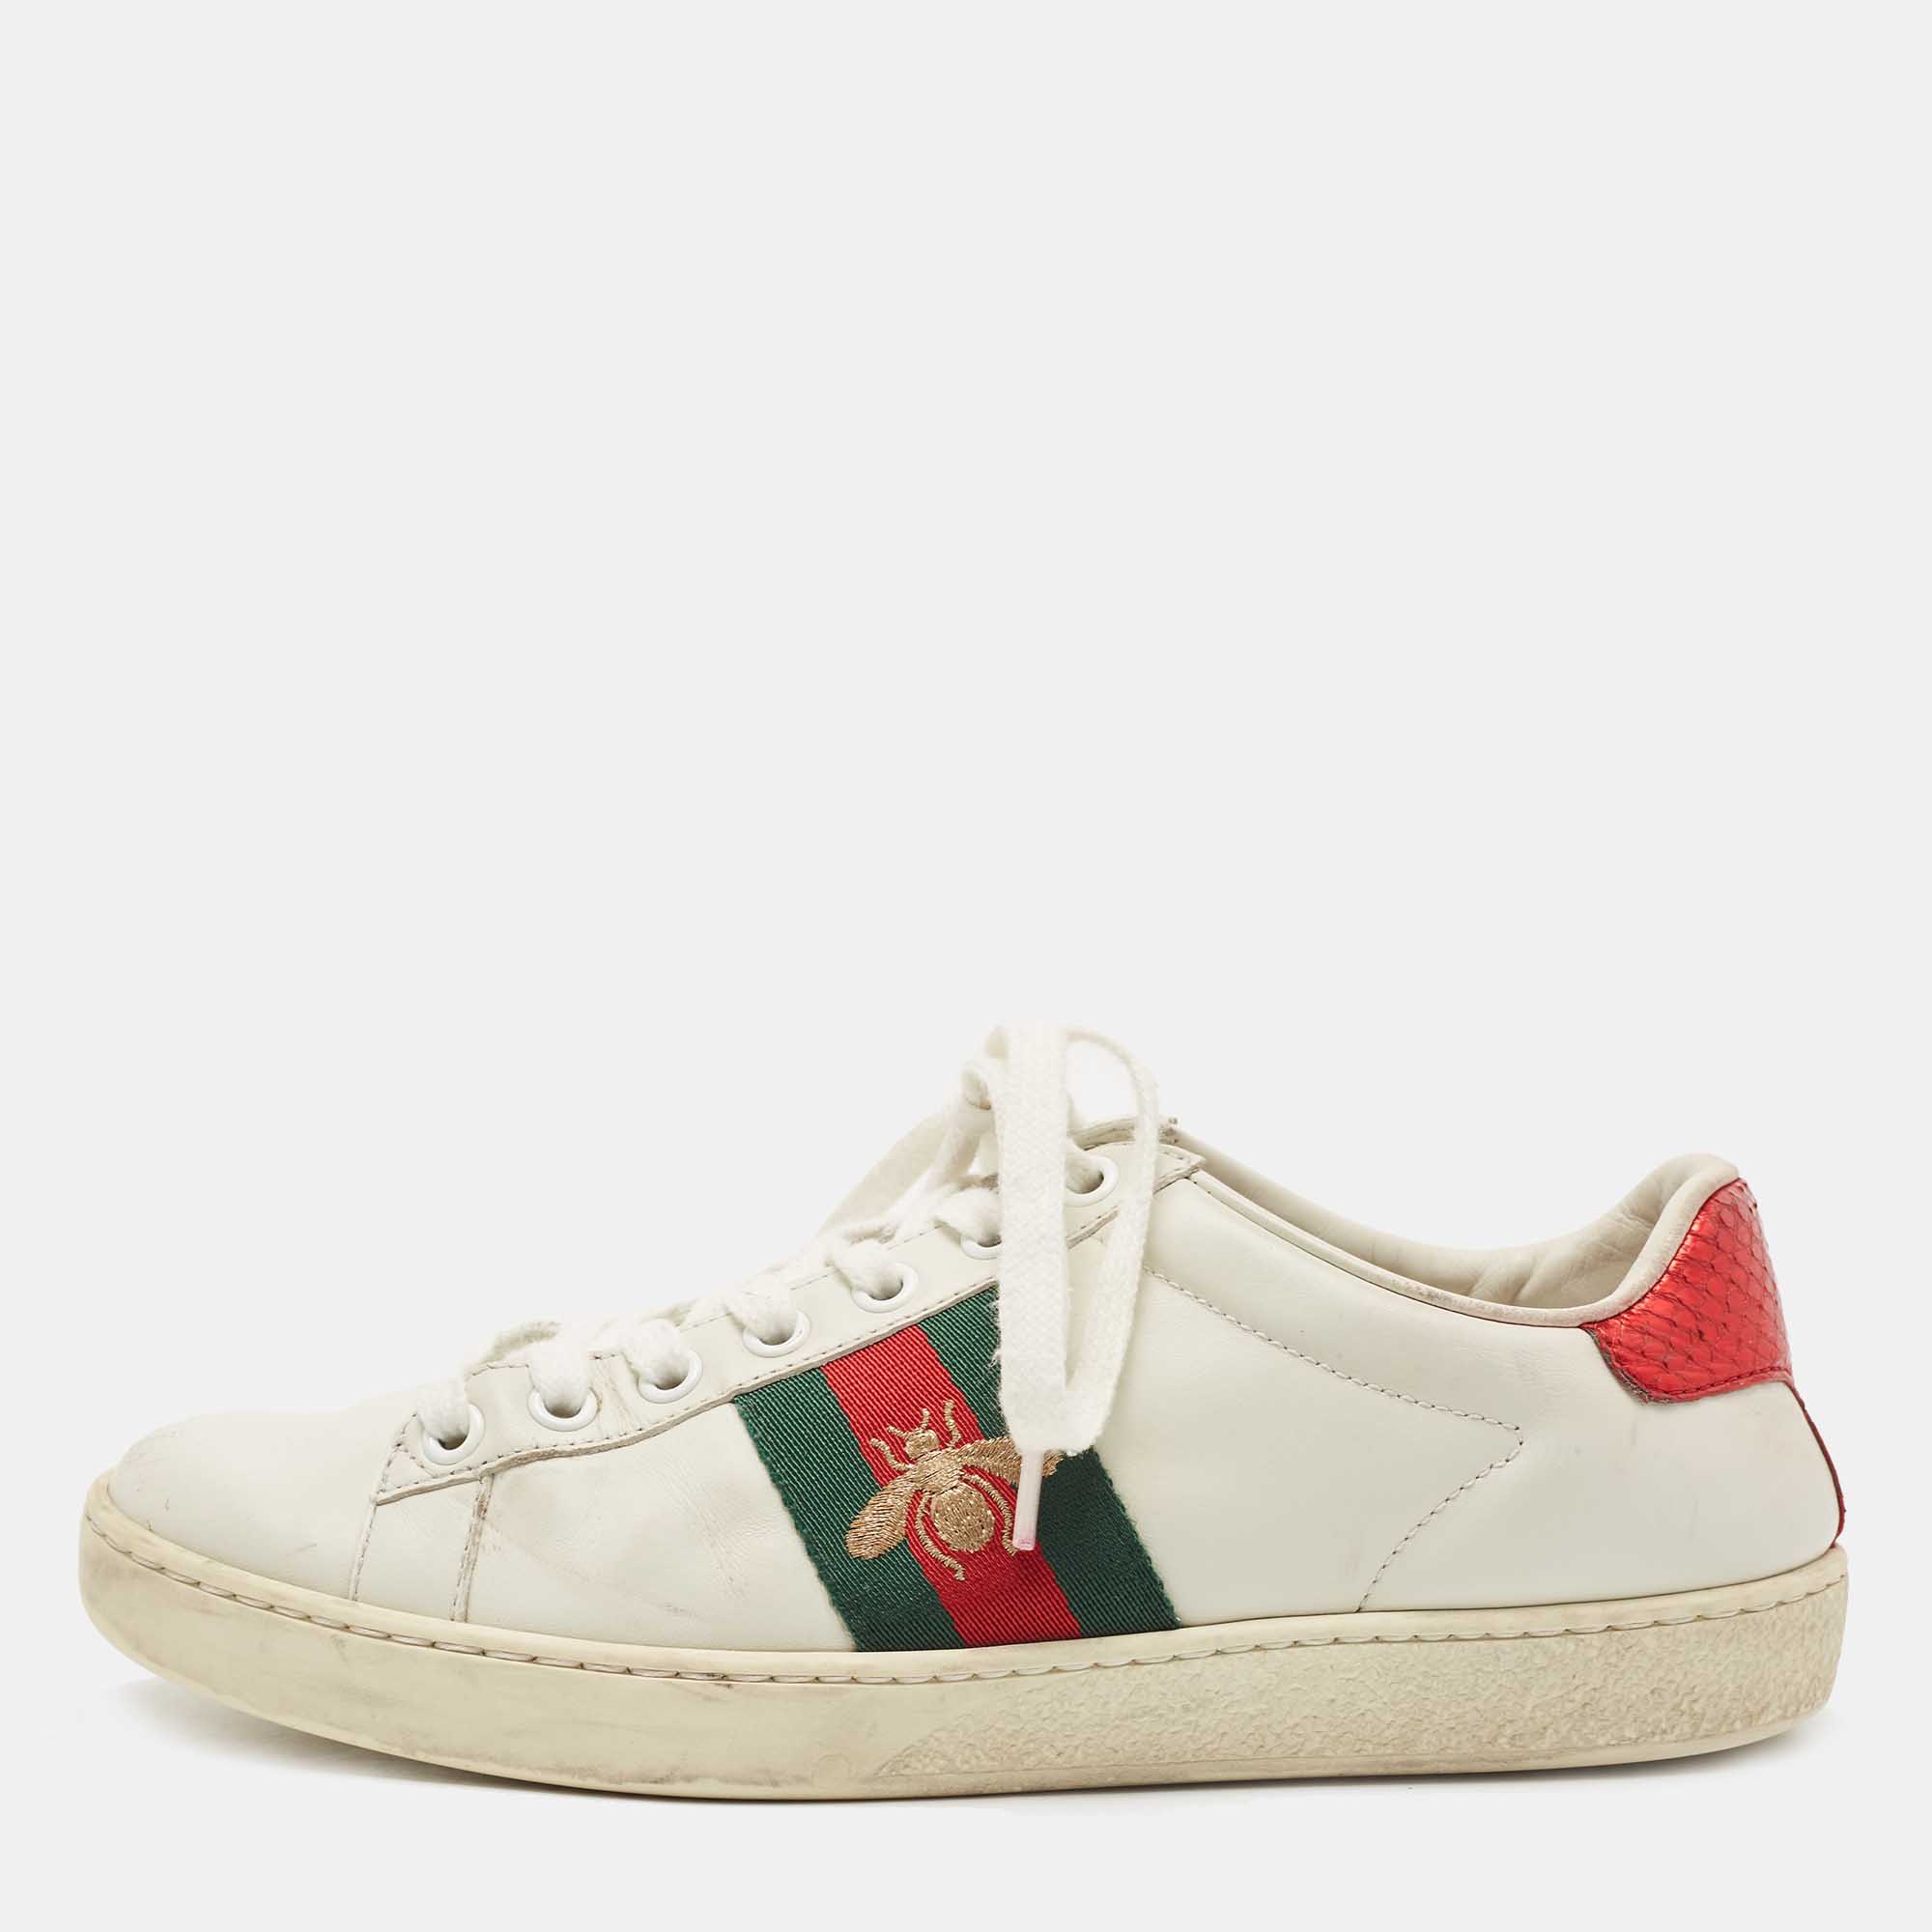 Pre-owned Gucci White Leather Bee Embroidered Ace Sneakers Size 35.5